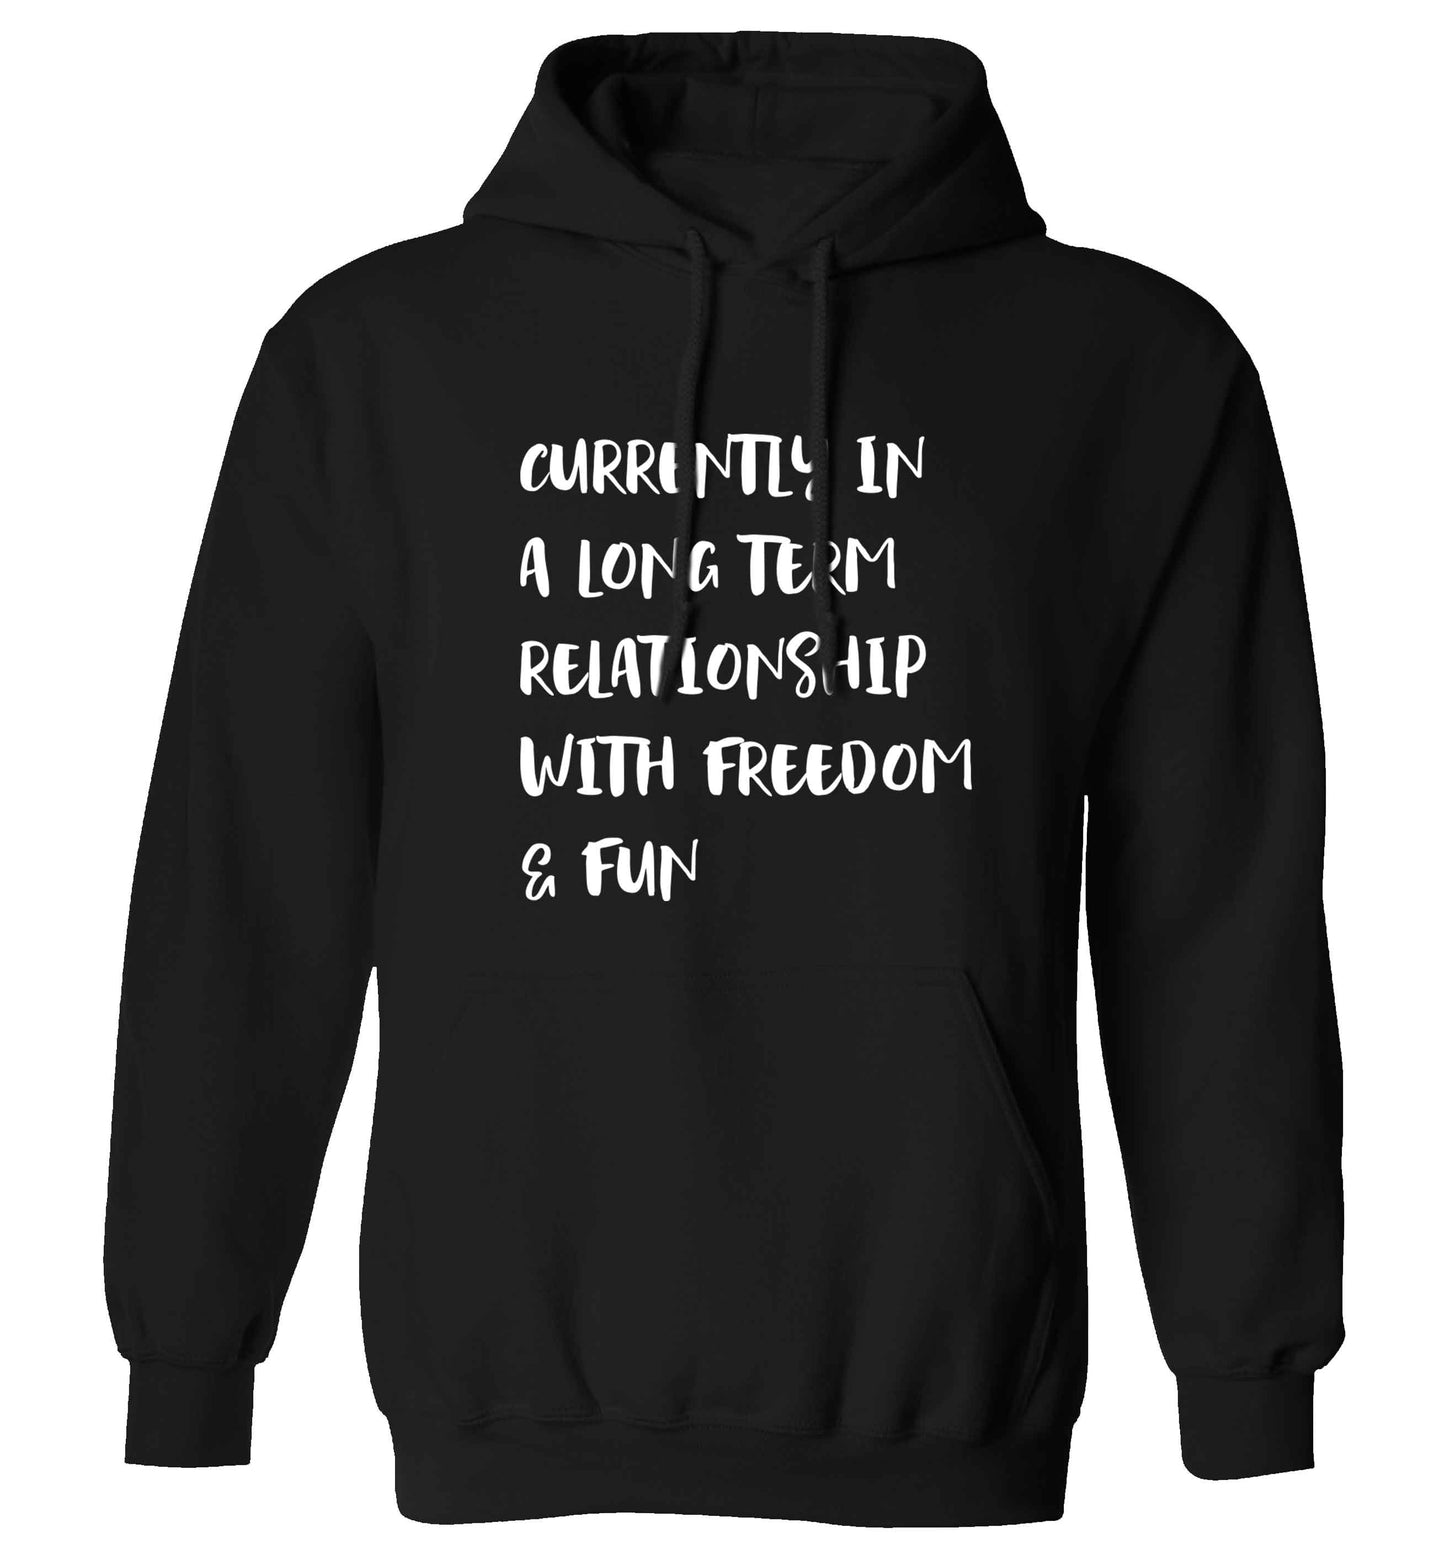 Currently in a long term relationship with freedom and fun adults unisex black hoodie 2XL